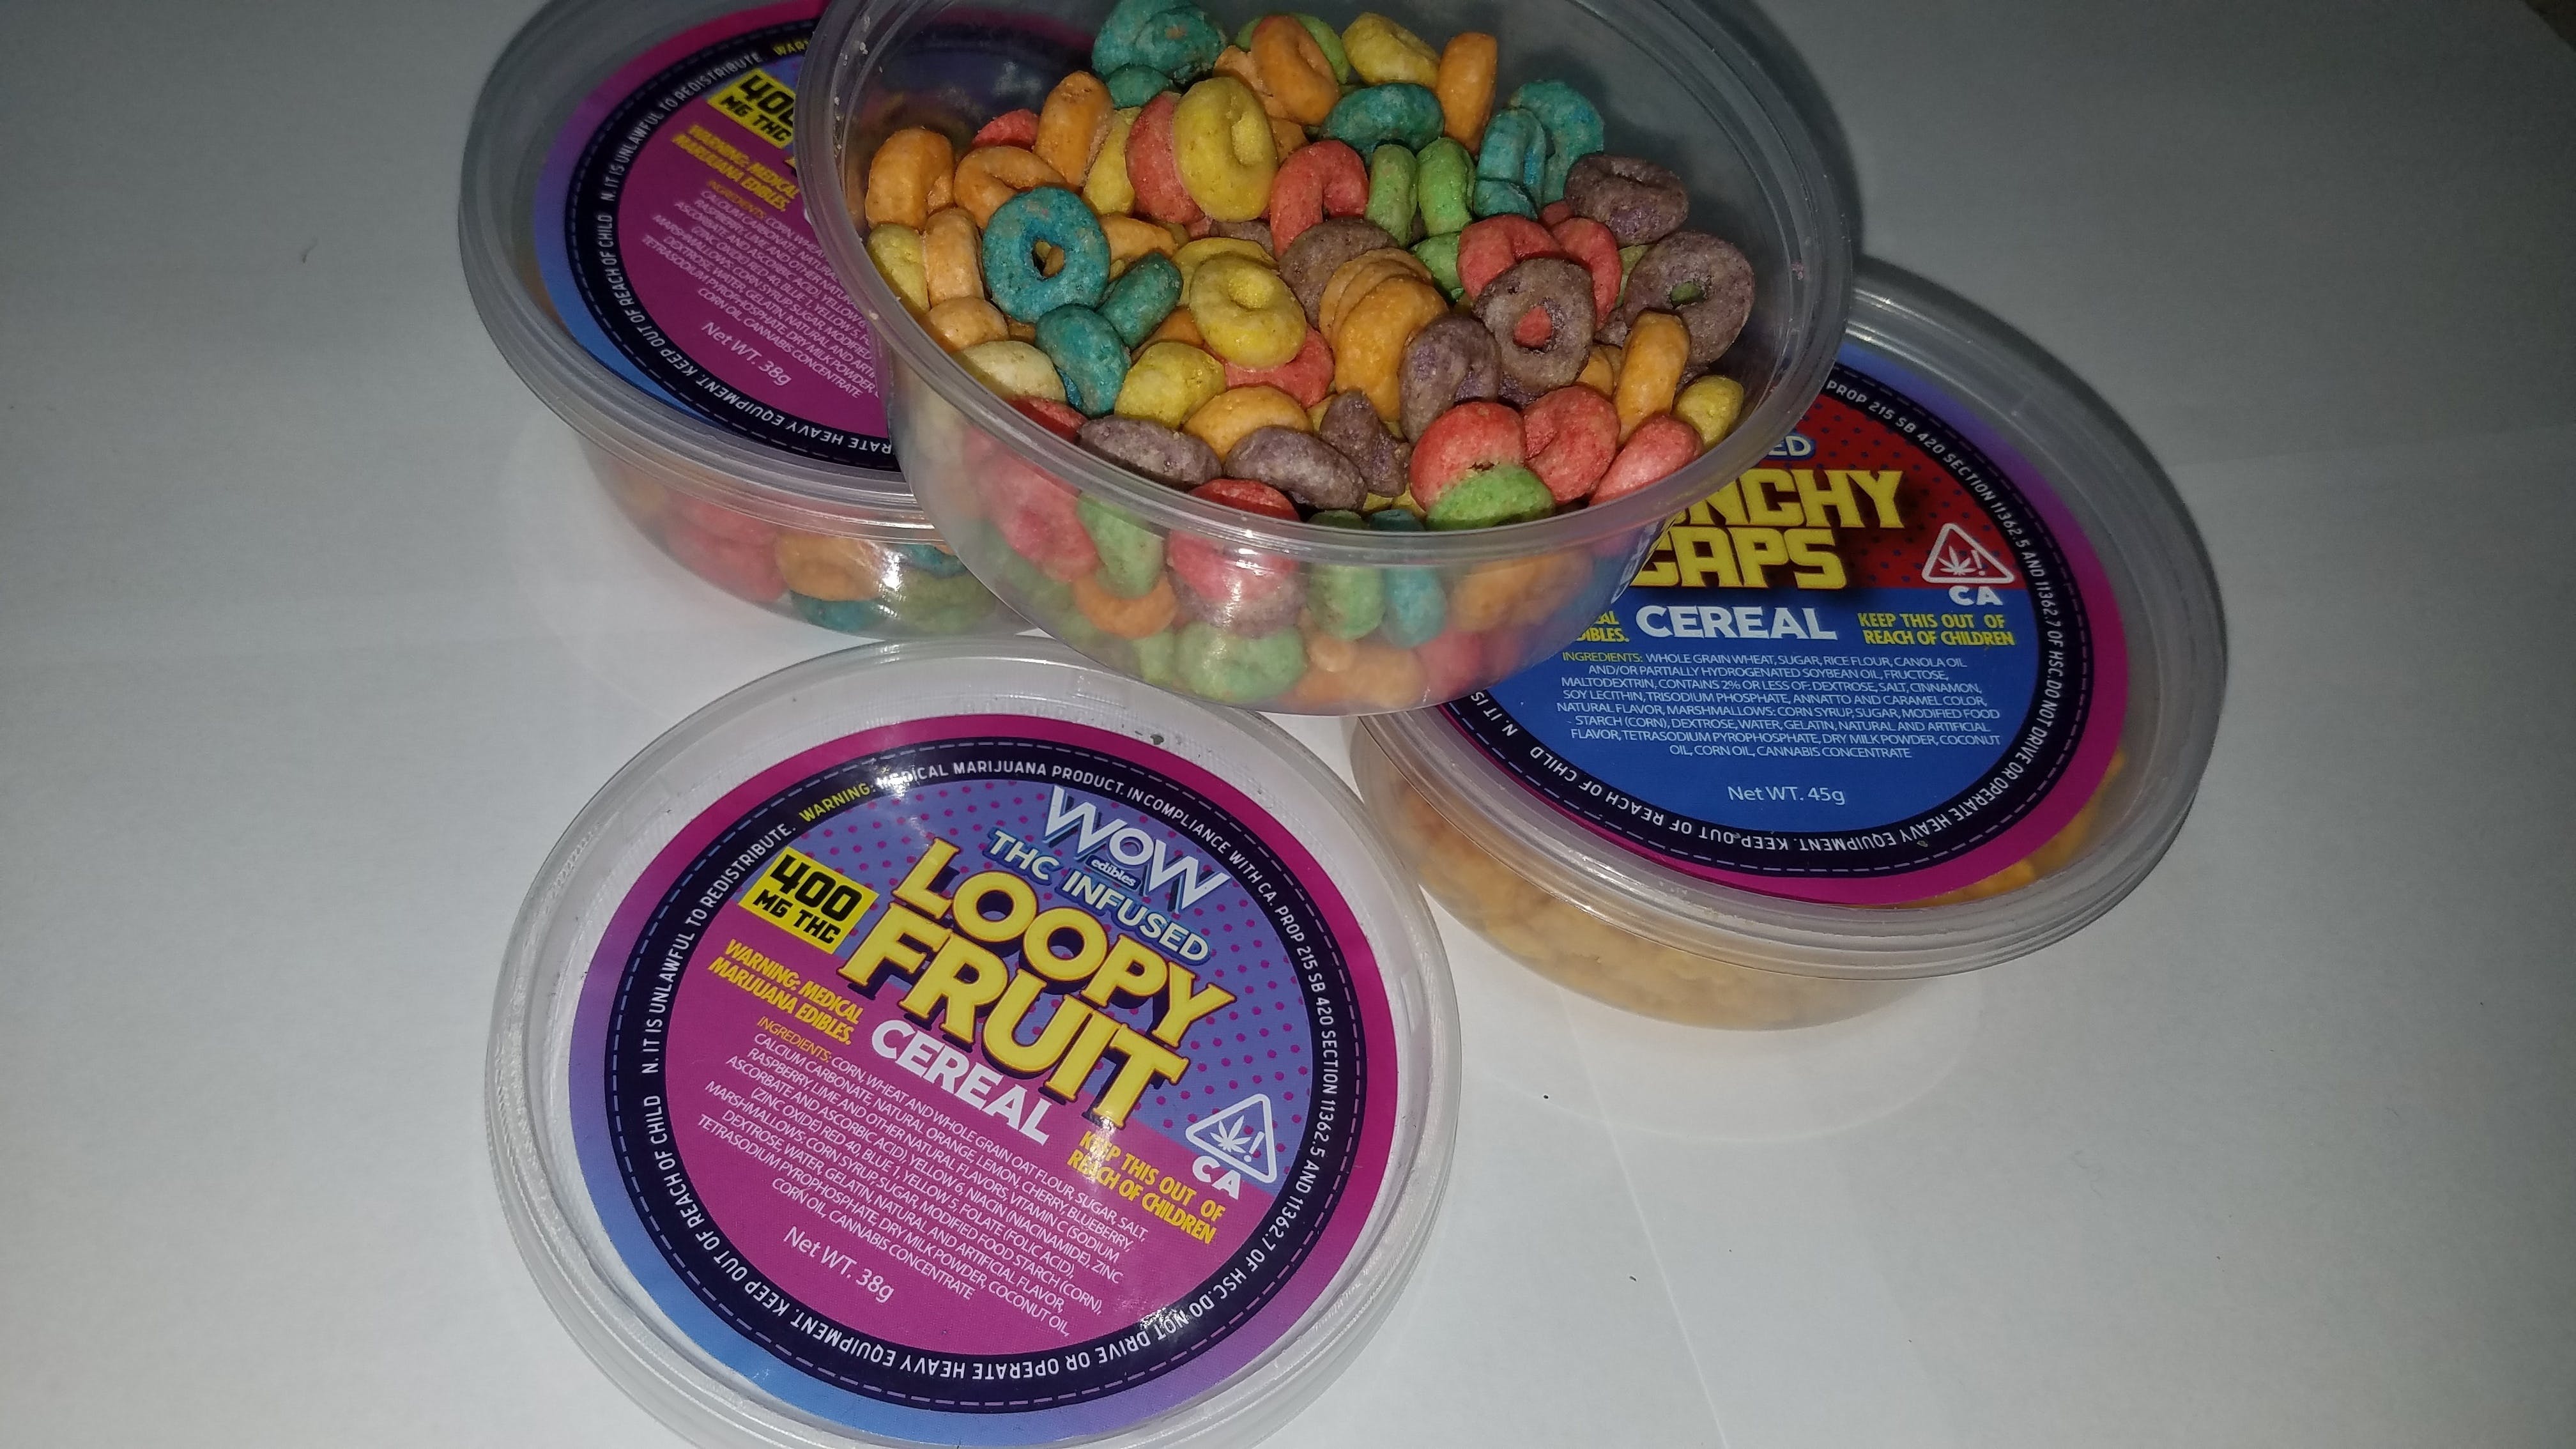 edible-wow-400mg-cereal-bowls-assorted-flavors-3for25